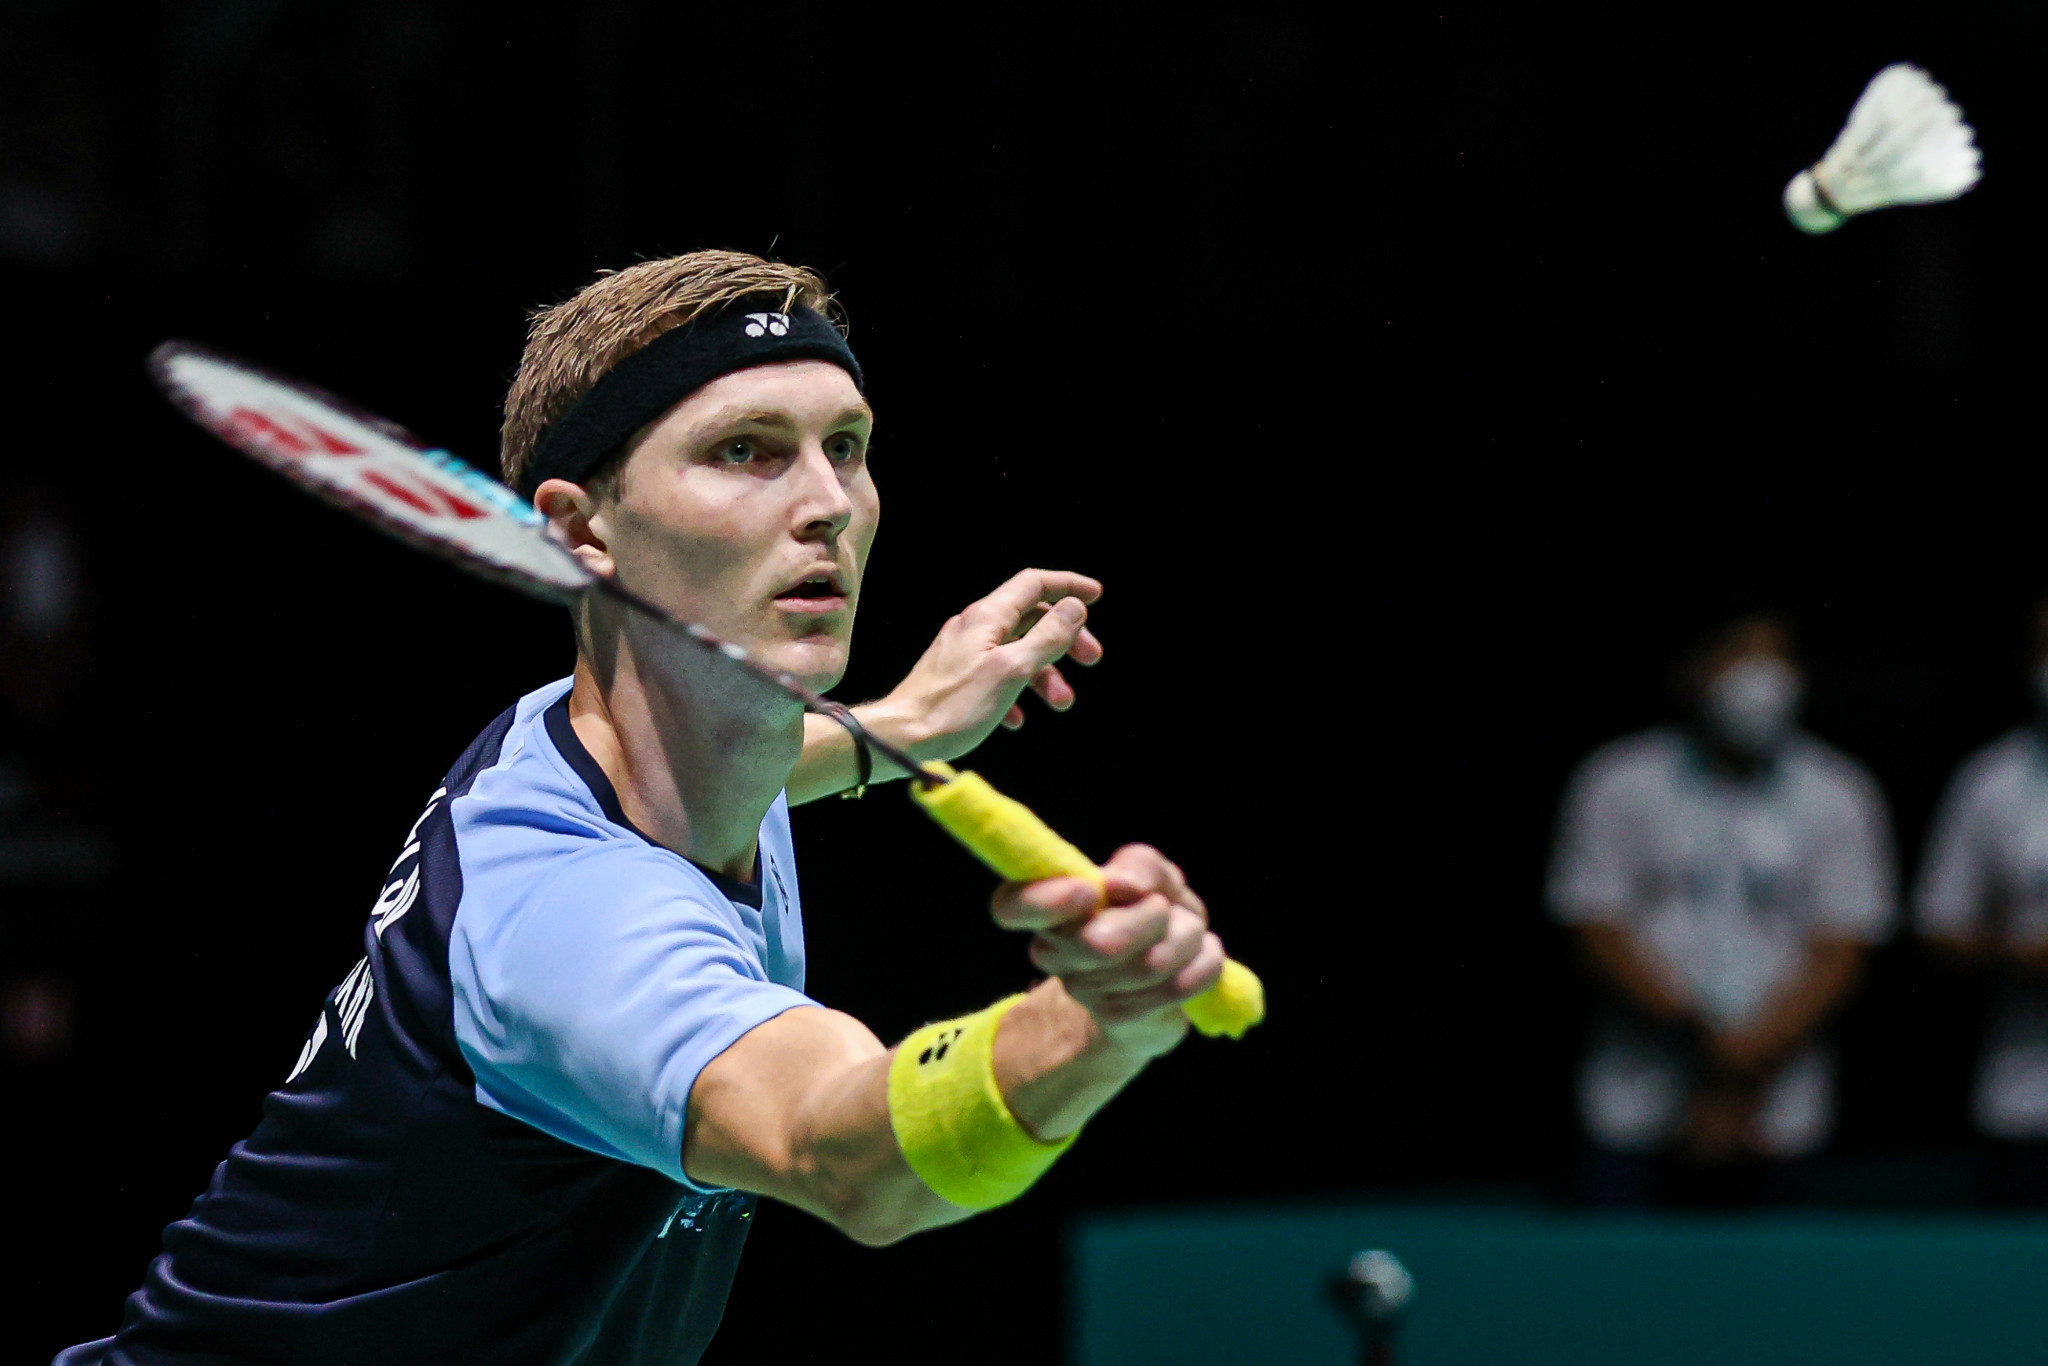 Denmark's Olympic champion Viktor Axelsen has dominated the men's singles on this year's BWF World Tour ©Getty Images